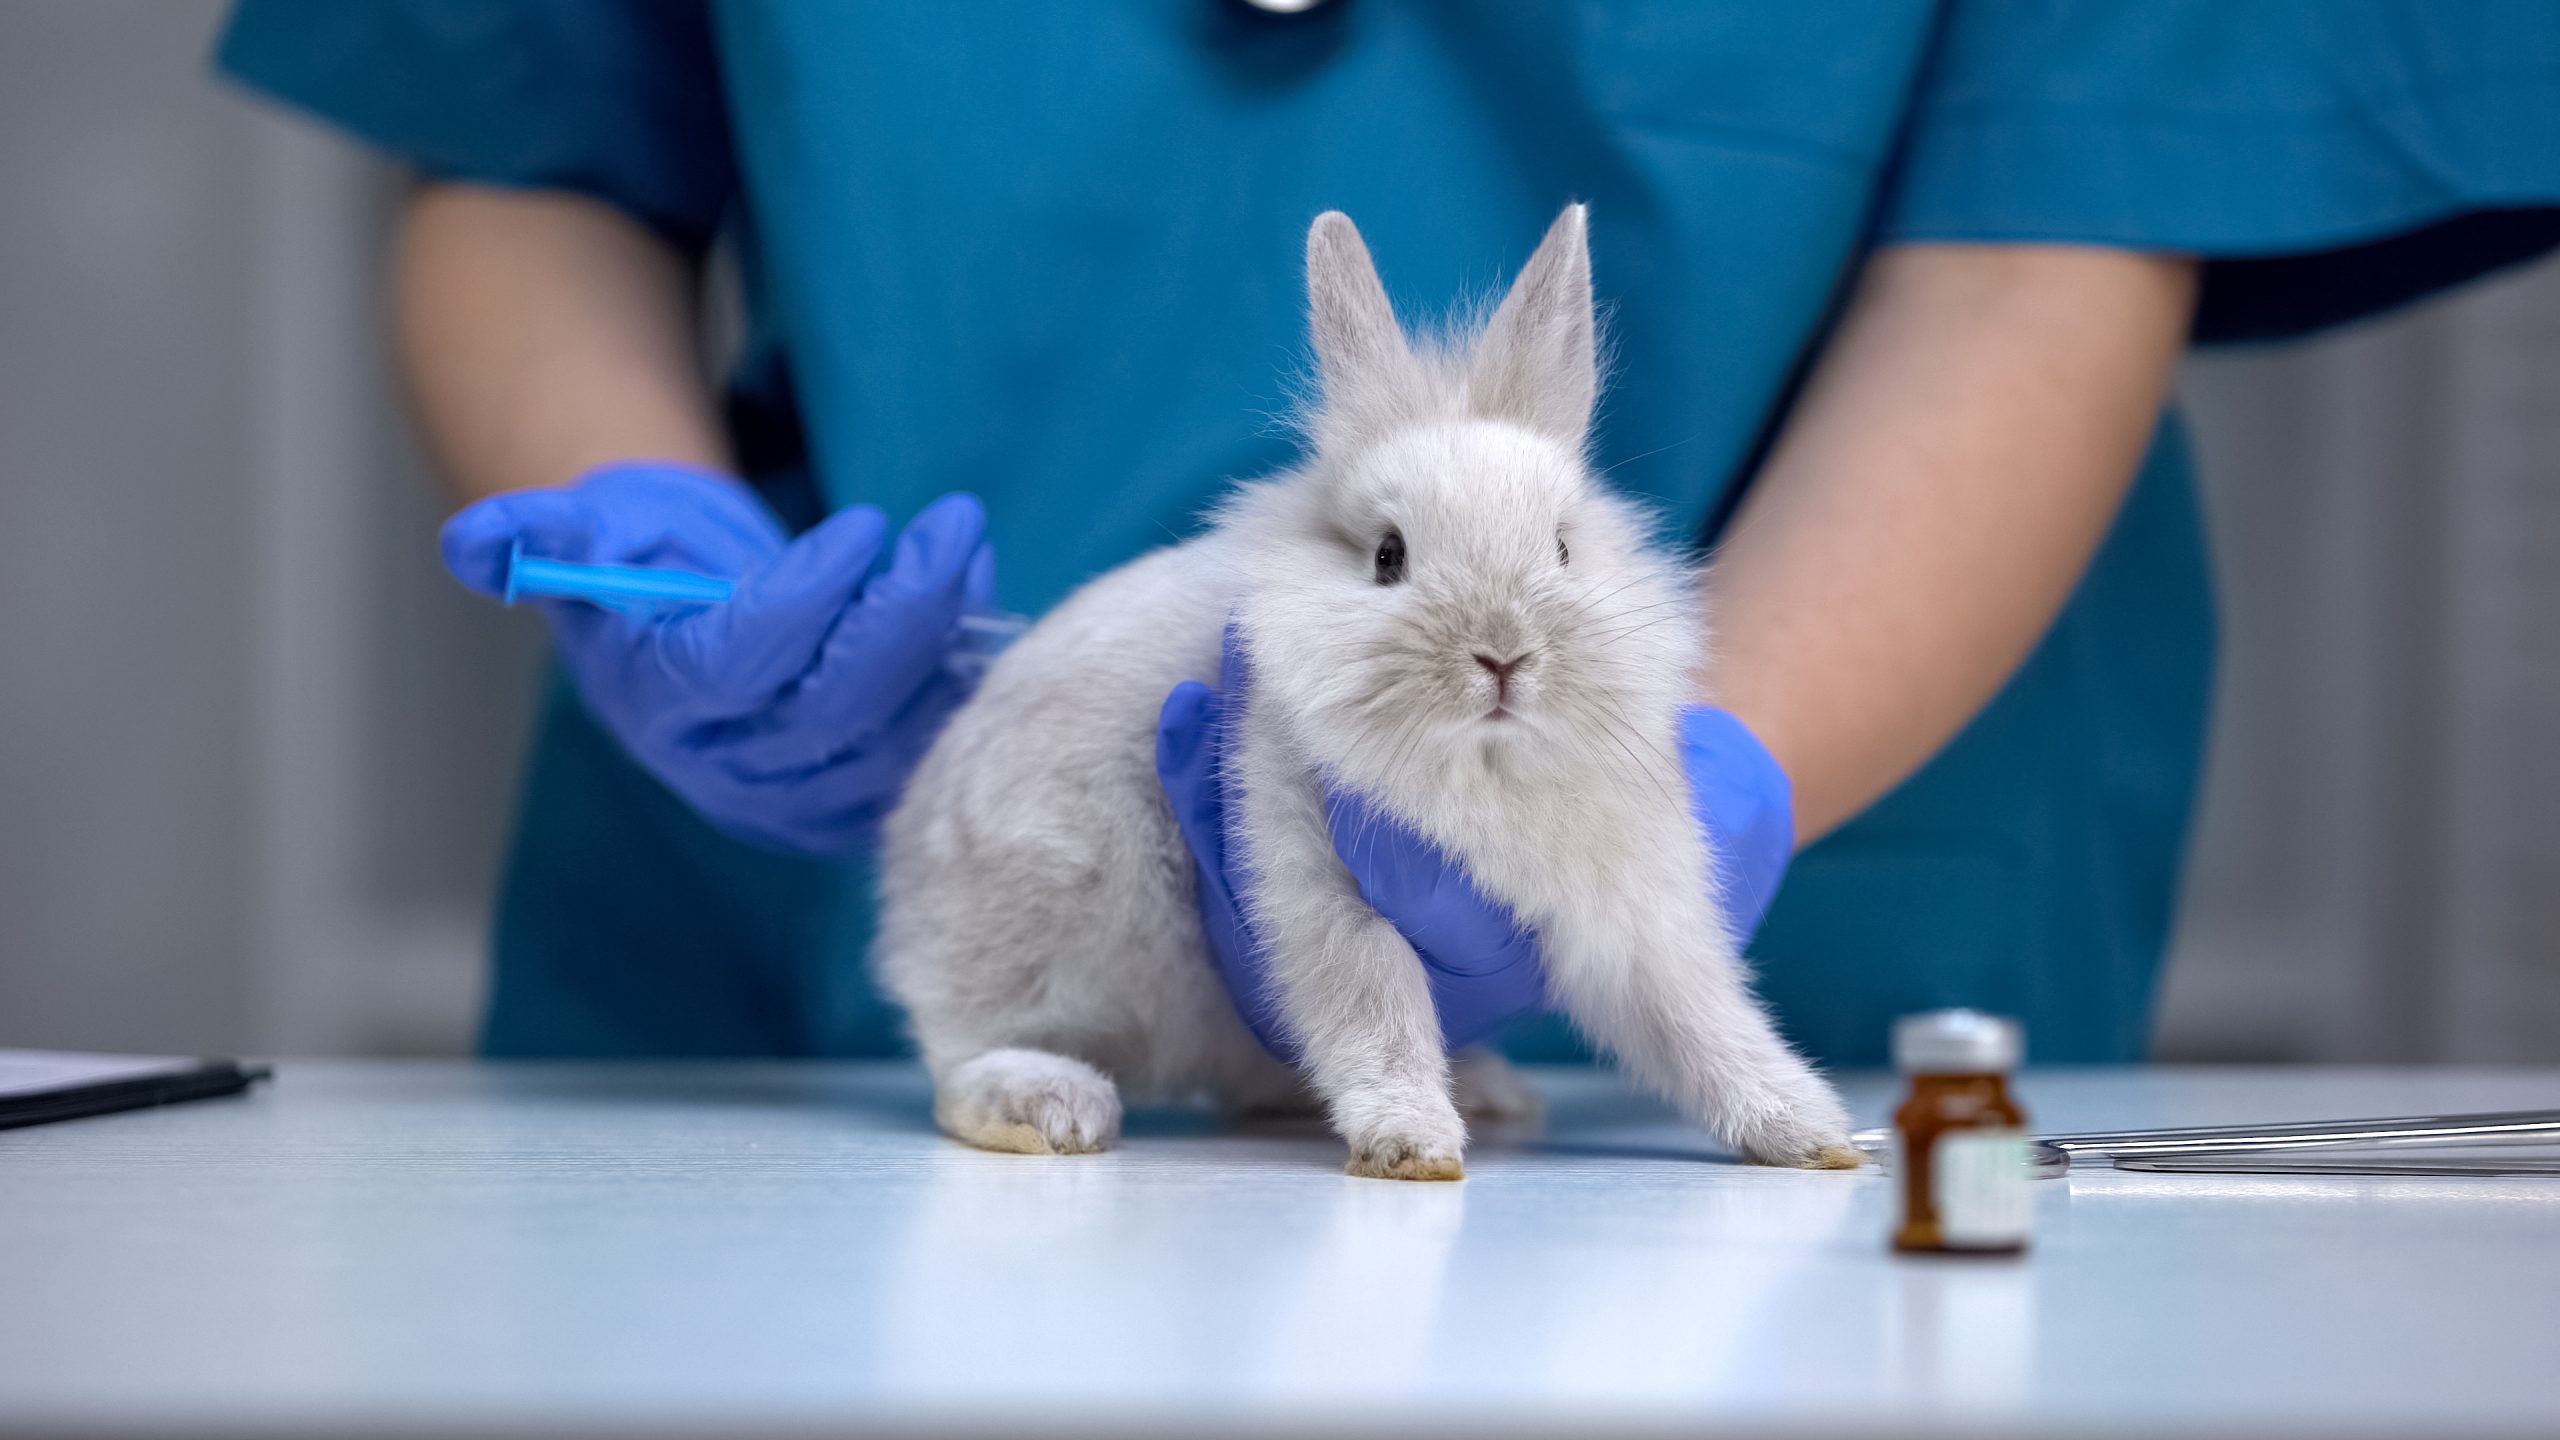 Bunny being injected with syringe by scientist